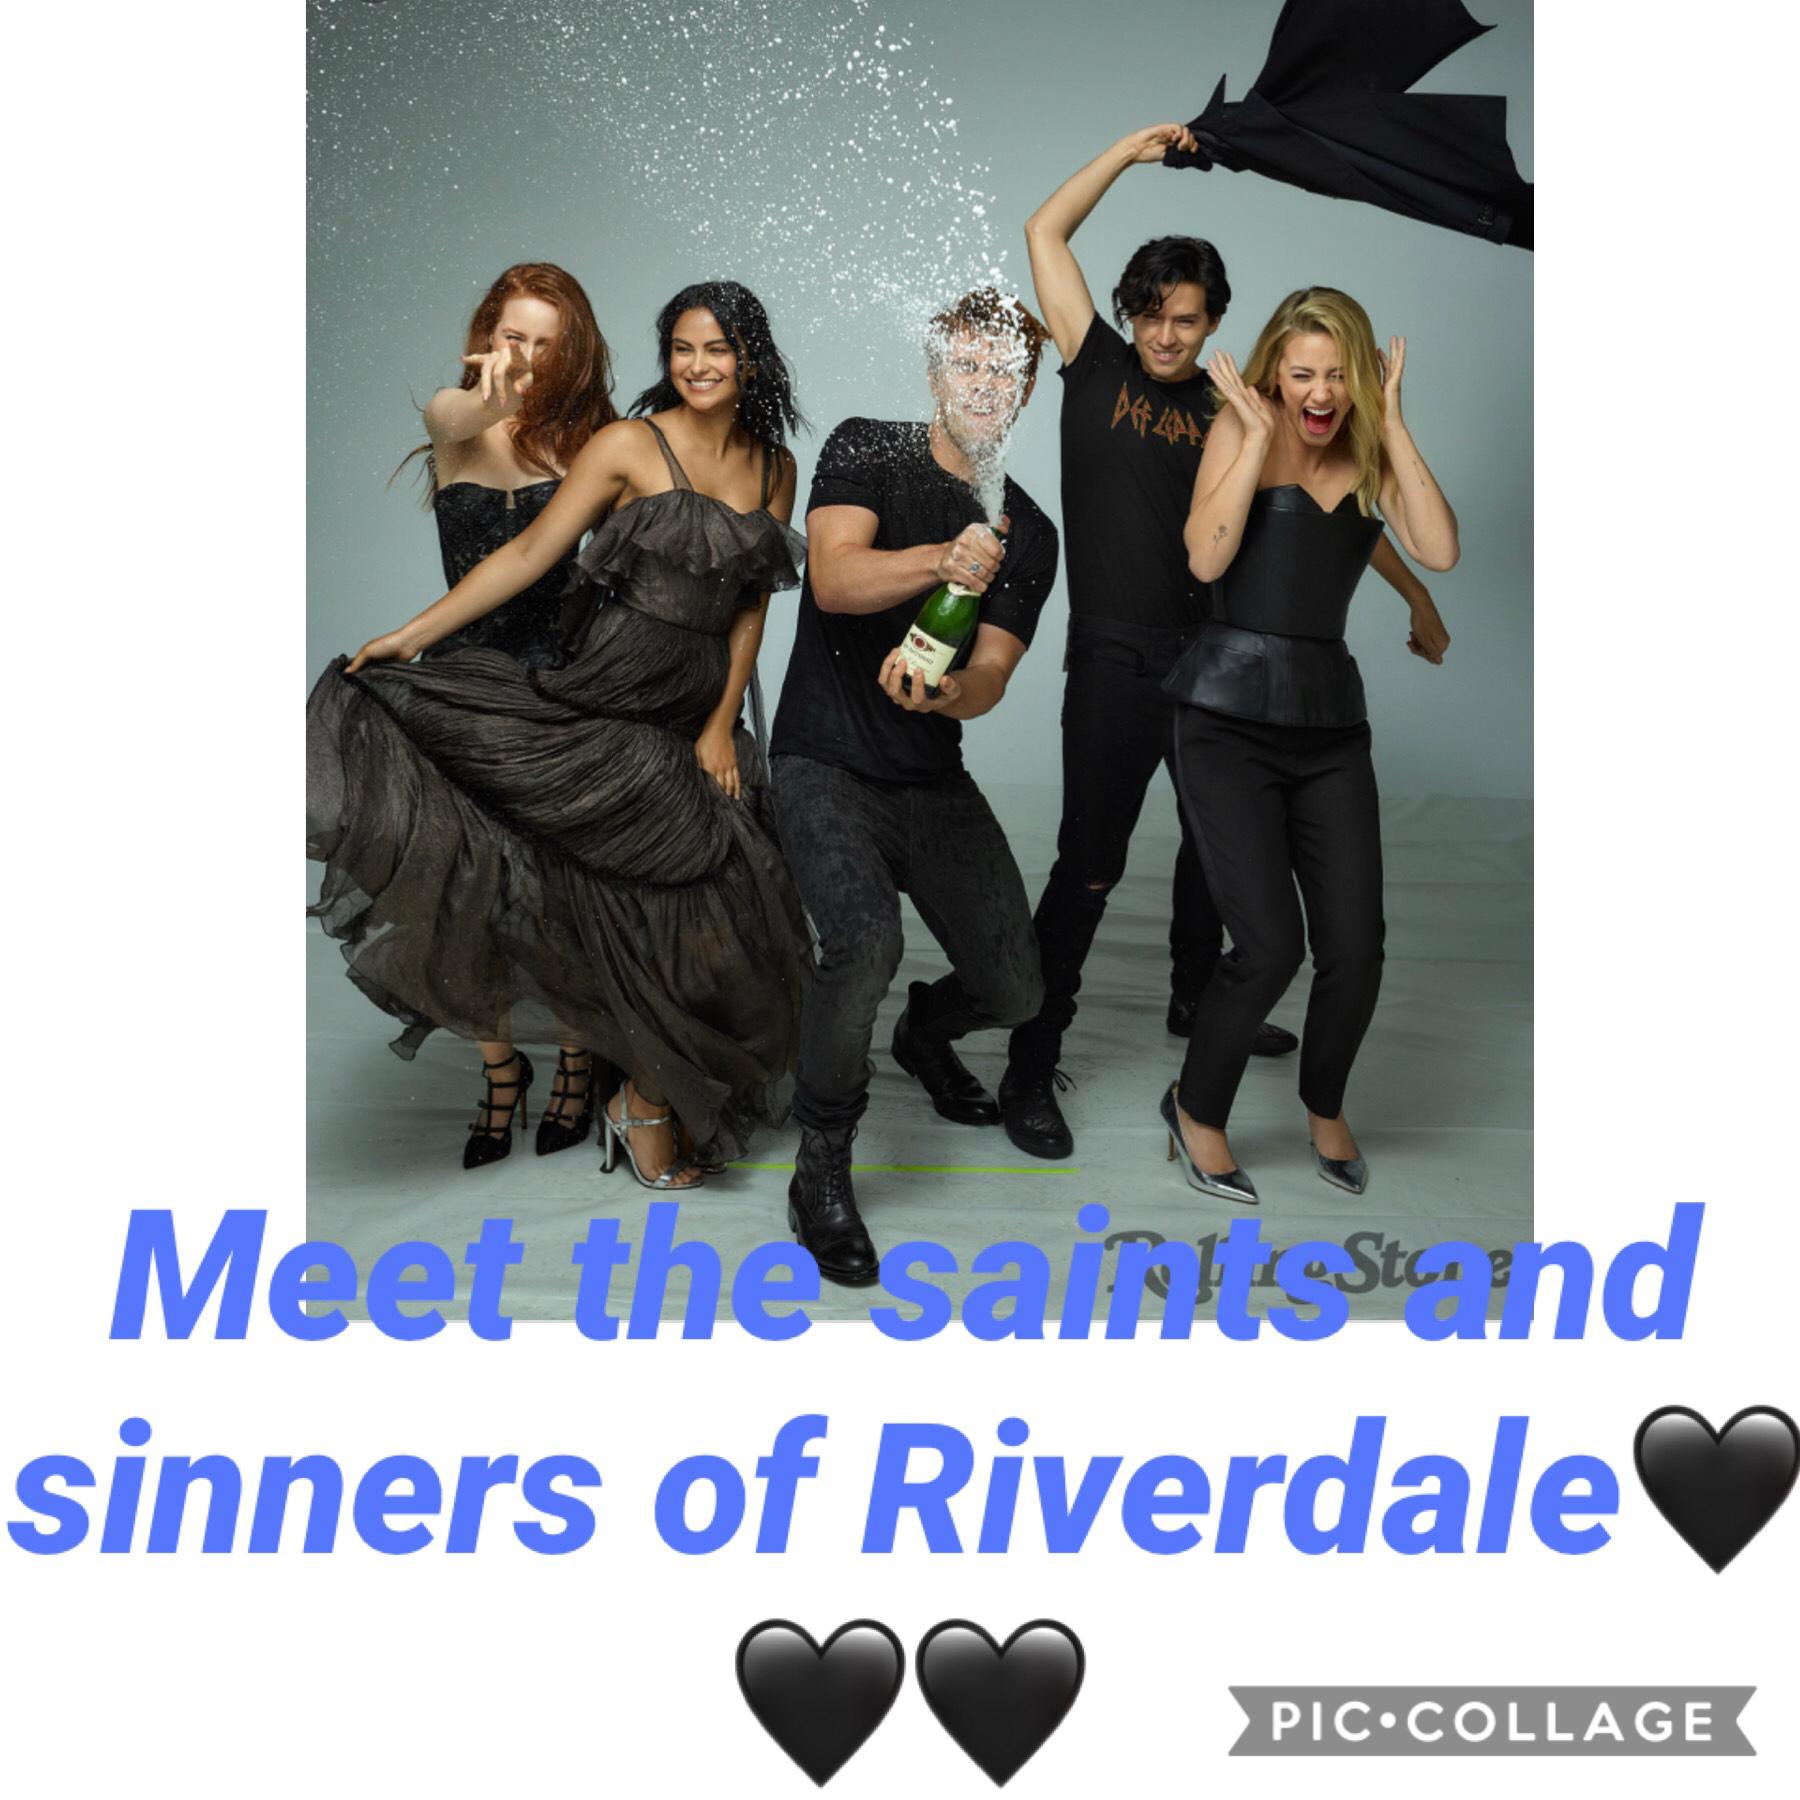 These are some cast of Riverdale🖤🖤Meet the saints and sinners of Riverdale🖤🖤🖤Like and follow plz